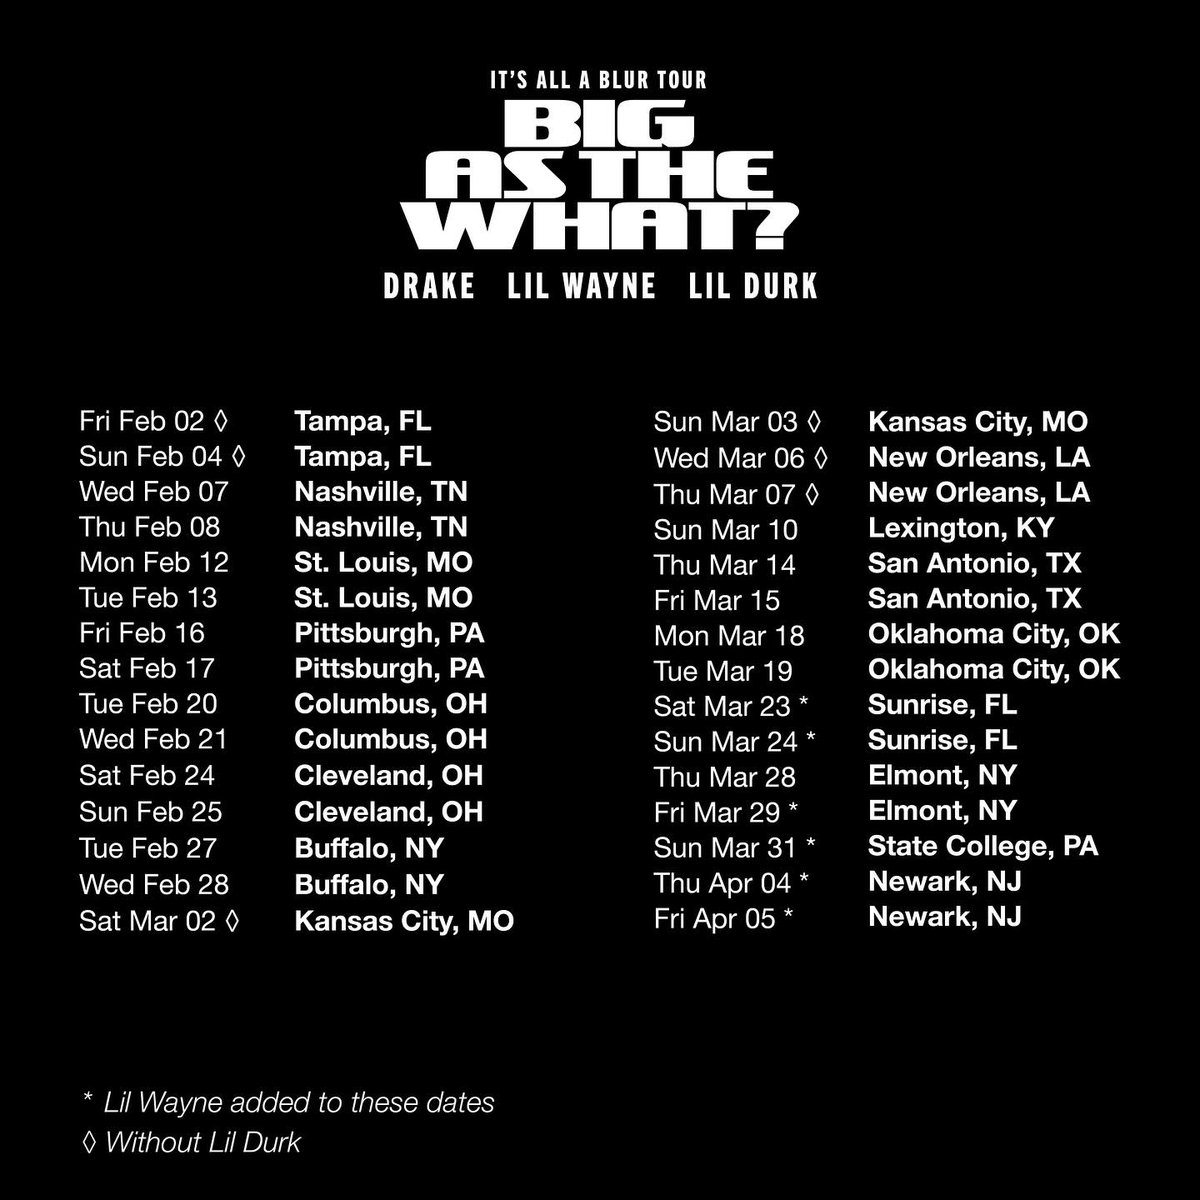 It’s All A Blur Tour: Big As The What updates!! @LilTunechi will be joining @Drake and @lildurk in select cities, with two additional shows added in Newark, NJ For information on your location and presale details for new dates, click here: drakerelated.com/pages/tour